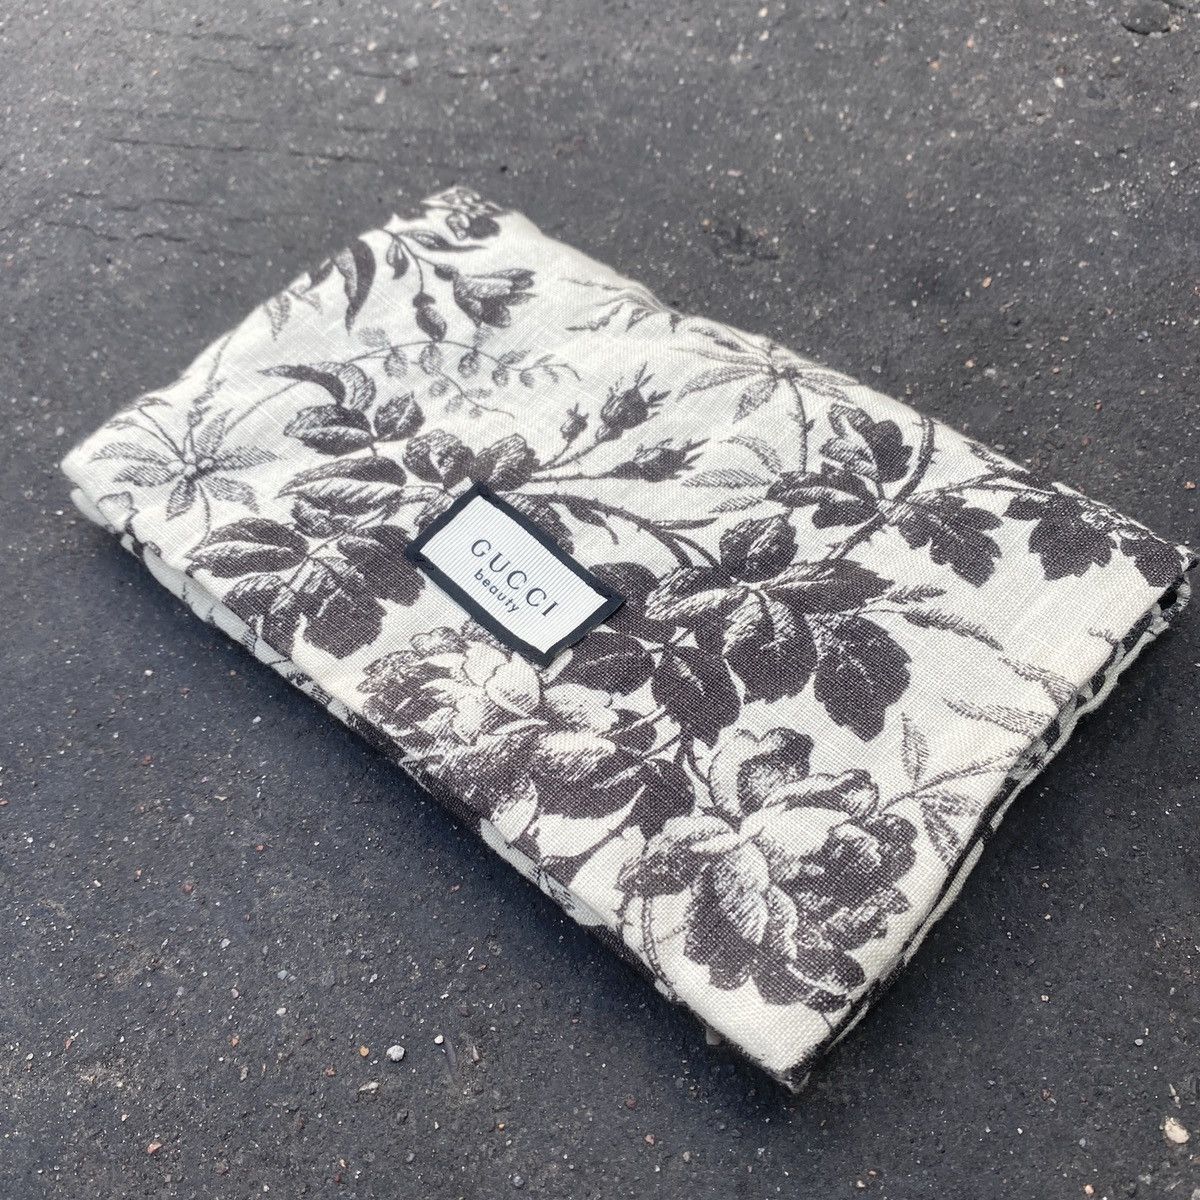 Gucci Bloom Y3 Pouch Bag Floral Pattern Natural from Japan Free Shipping